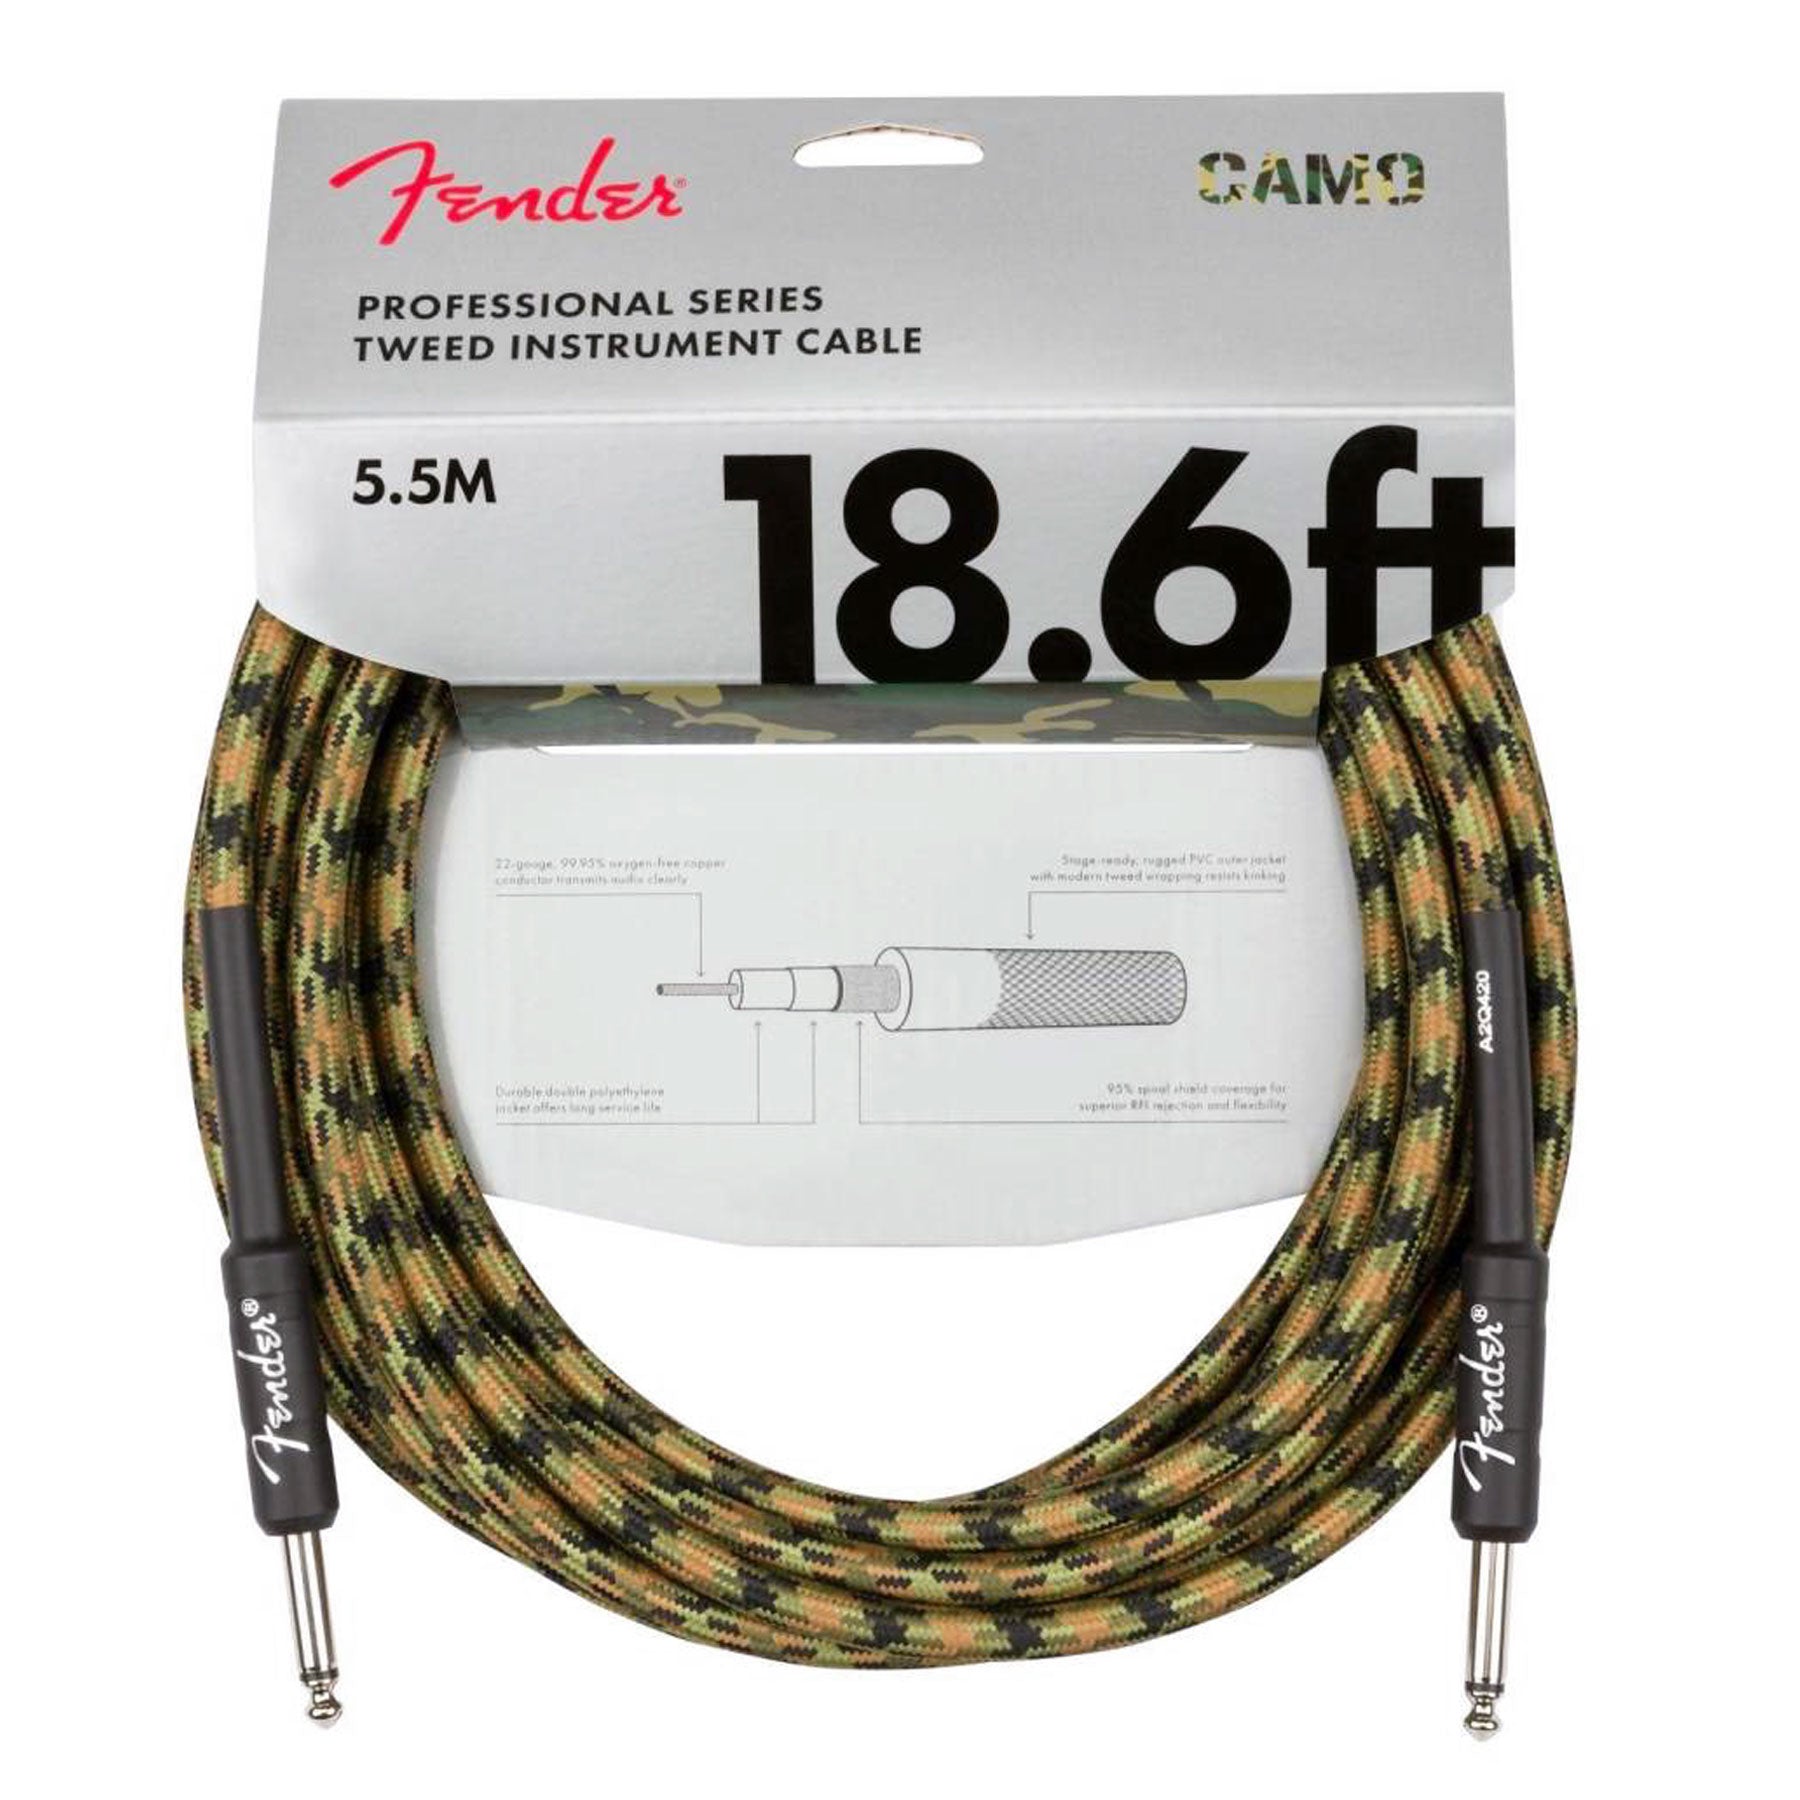 FENDER PROFESSIONAL SERIES INSTRUMENT CABLE 18.6’ WOODLAND CAMO STRAIGHT TO STRAIGHT